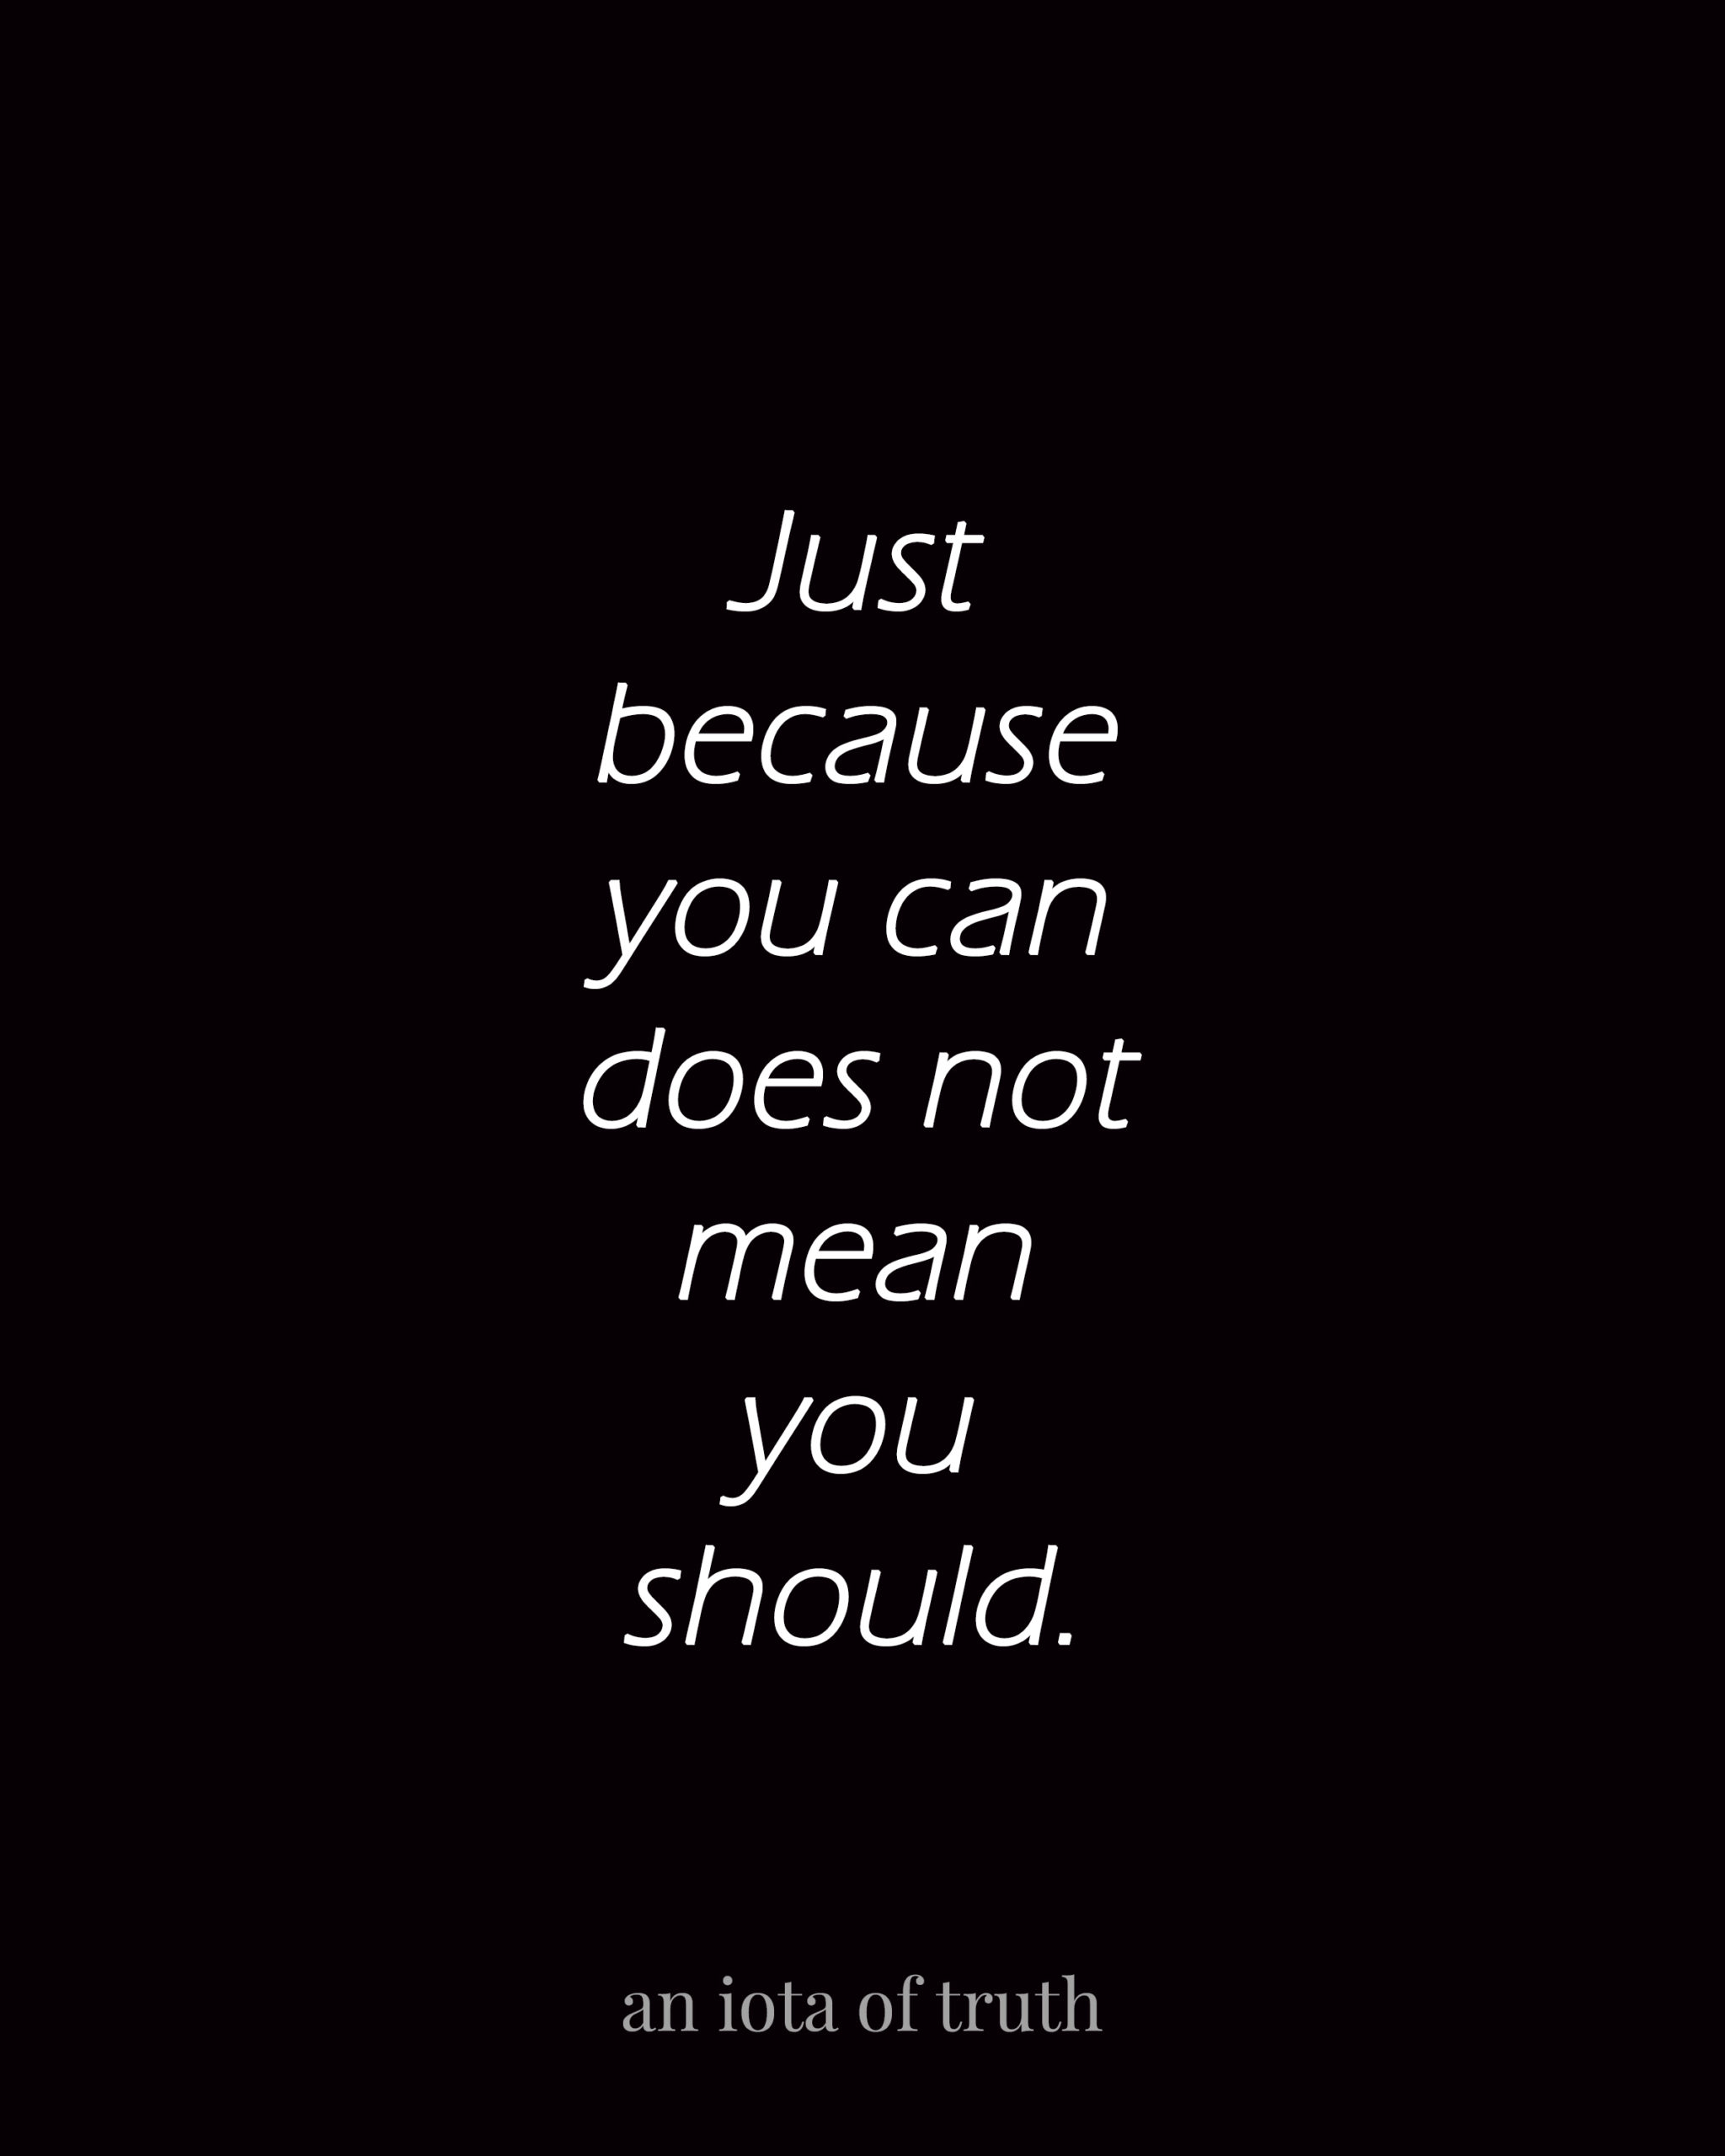 Just because you can does not mean you should.